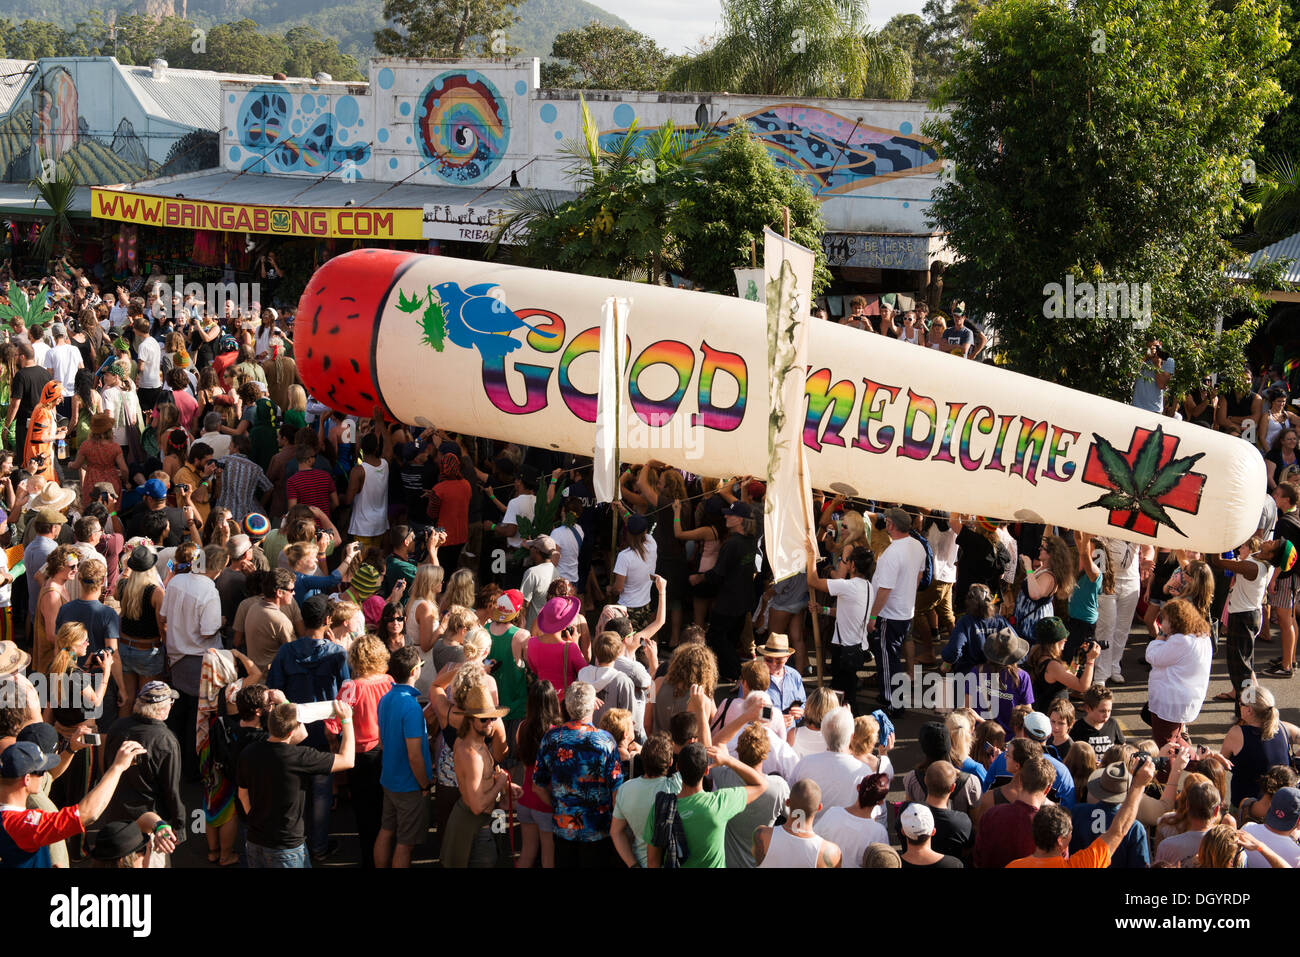 The giant joint, part of the Mardi Grass Parade in Nimbin protesting the illegality of marijuana. Stock Photo